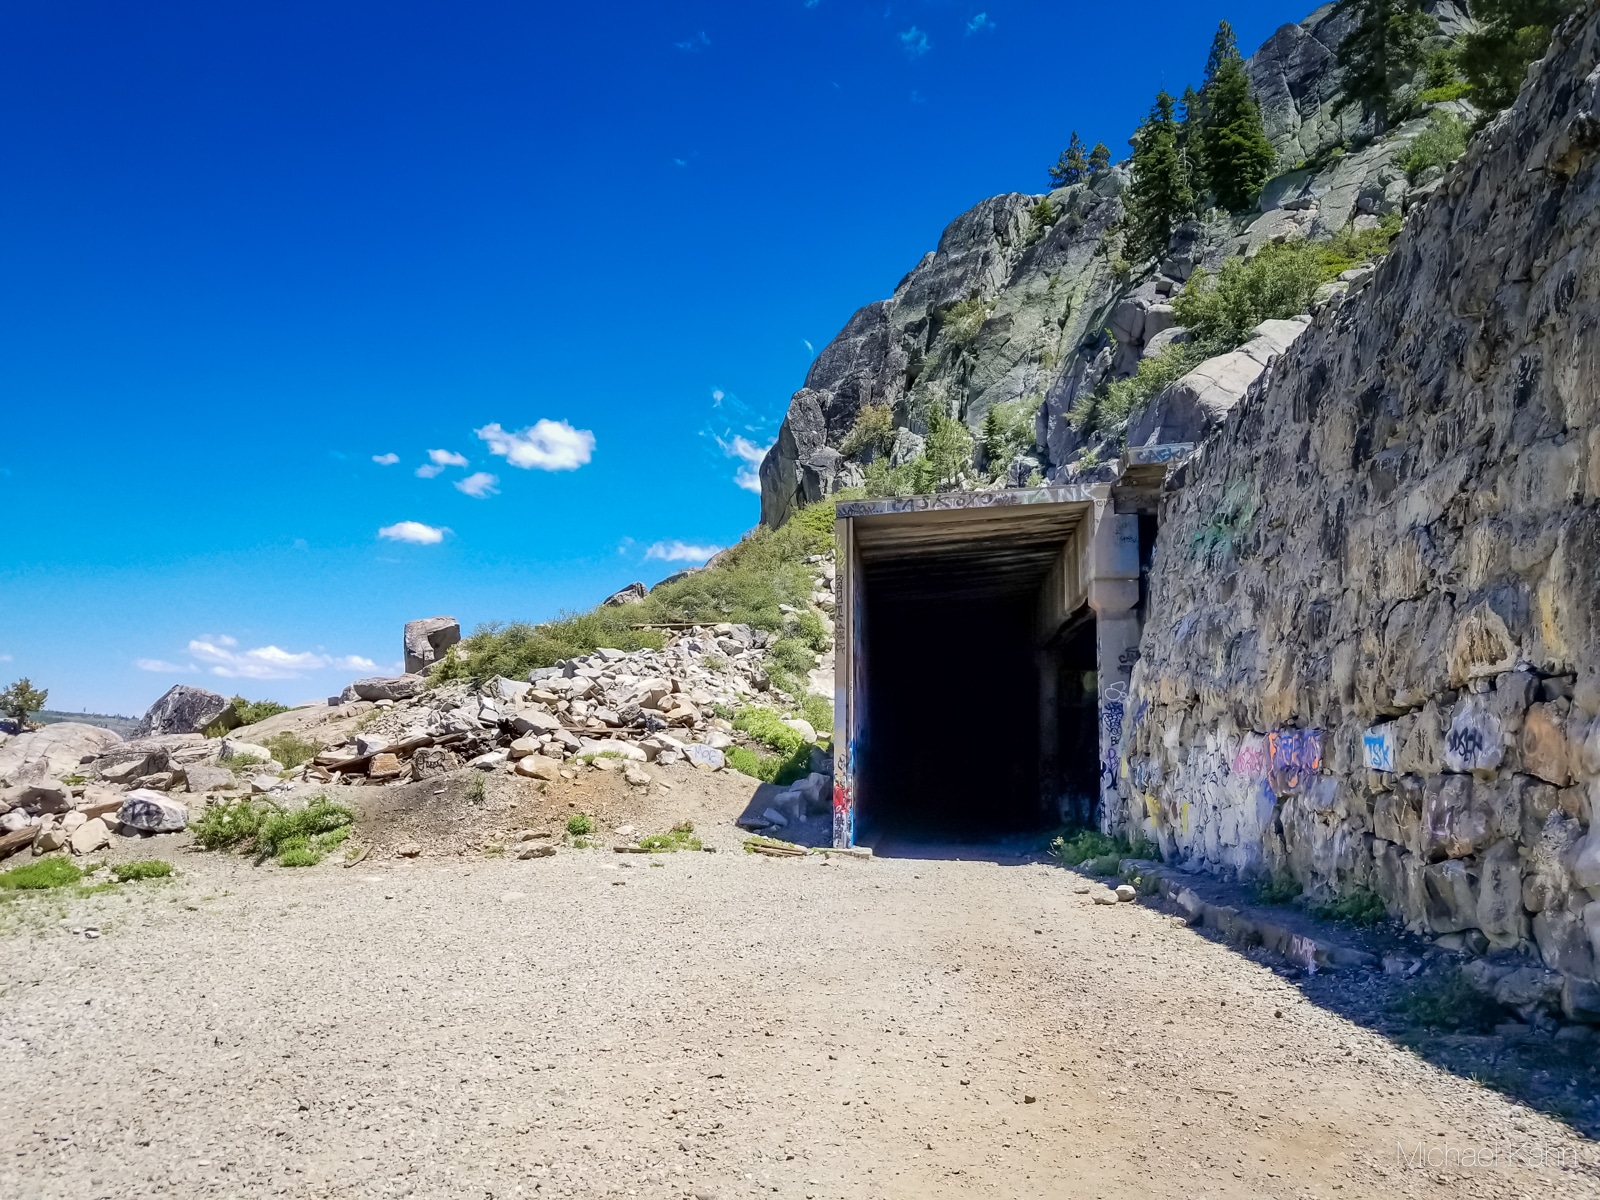 Donner pass summit tunnel hike, looking into tunnel